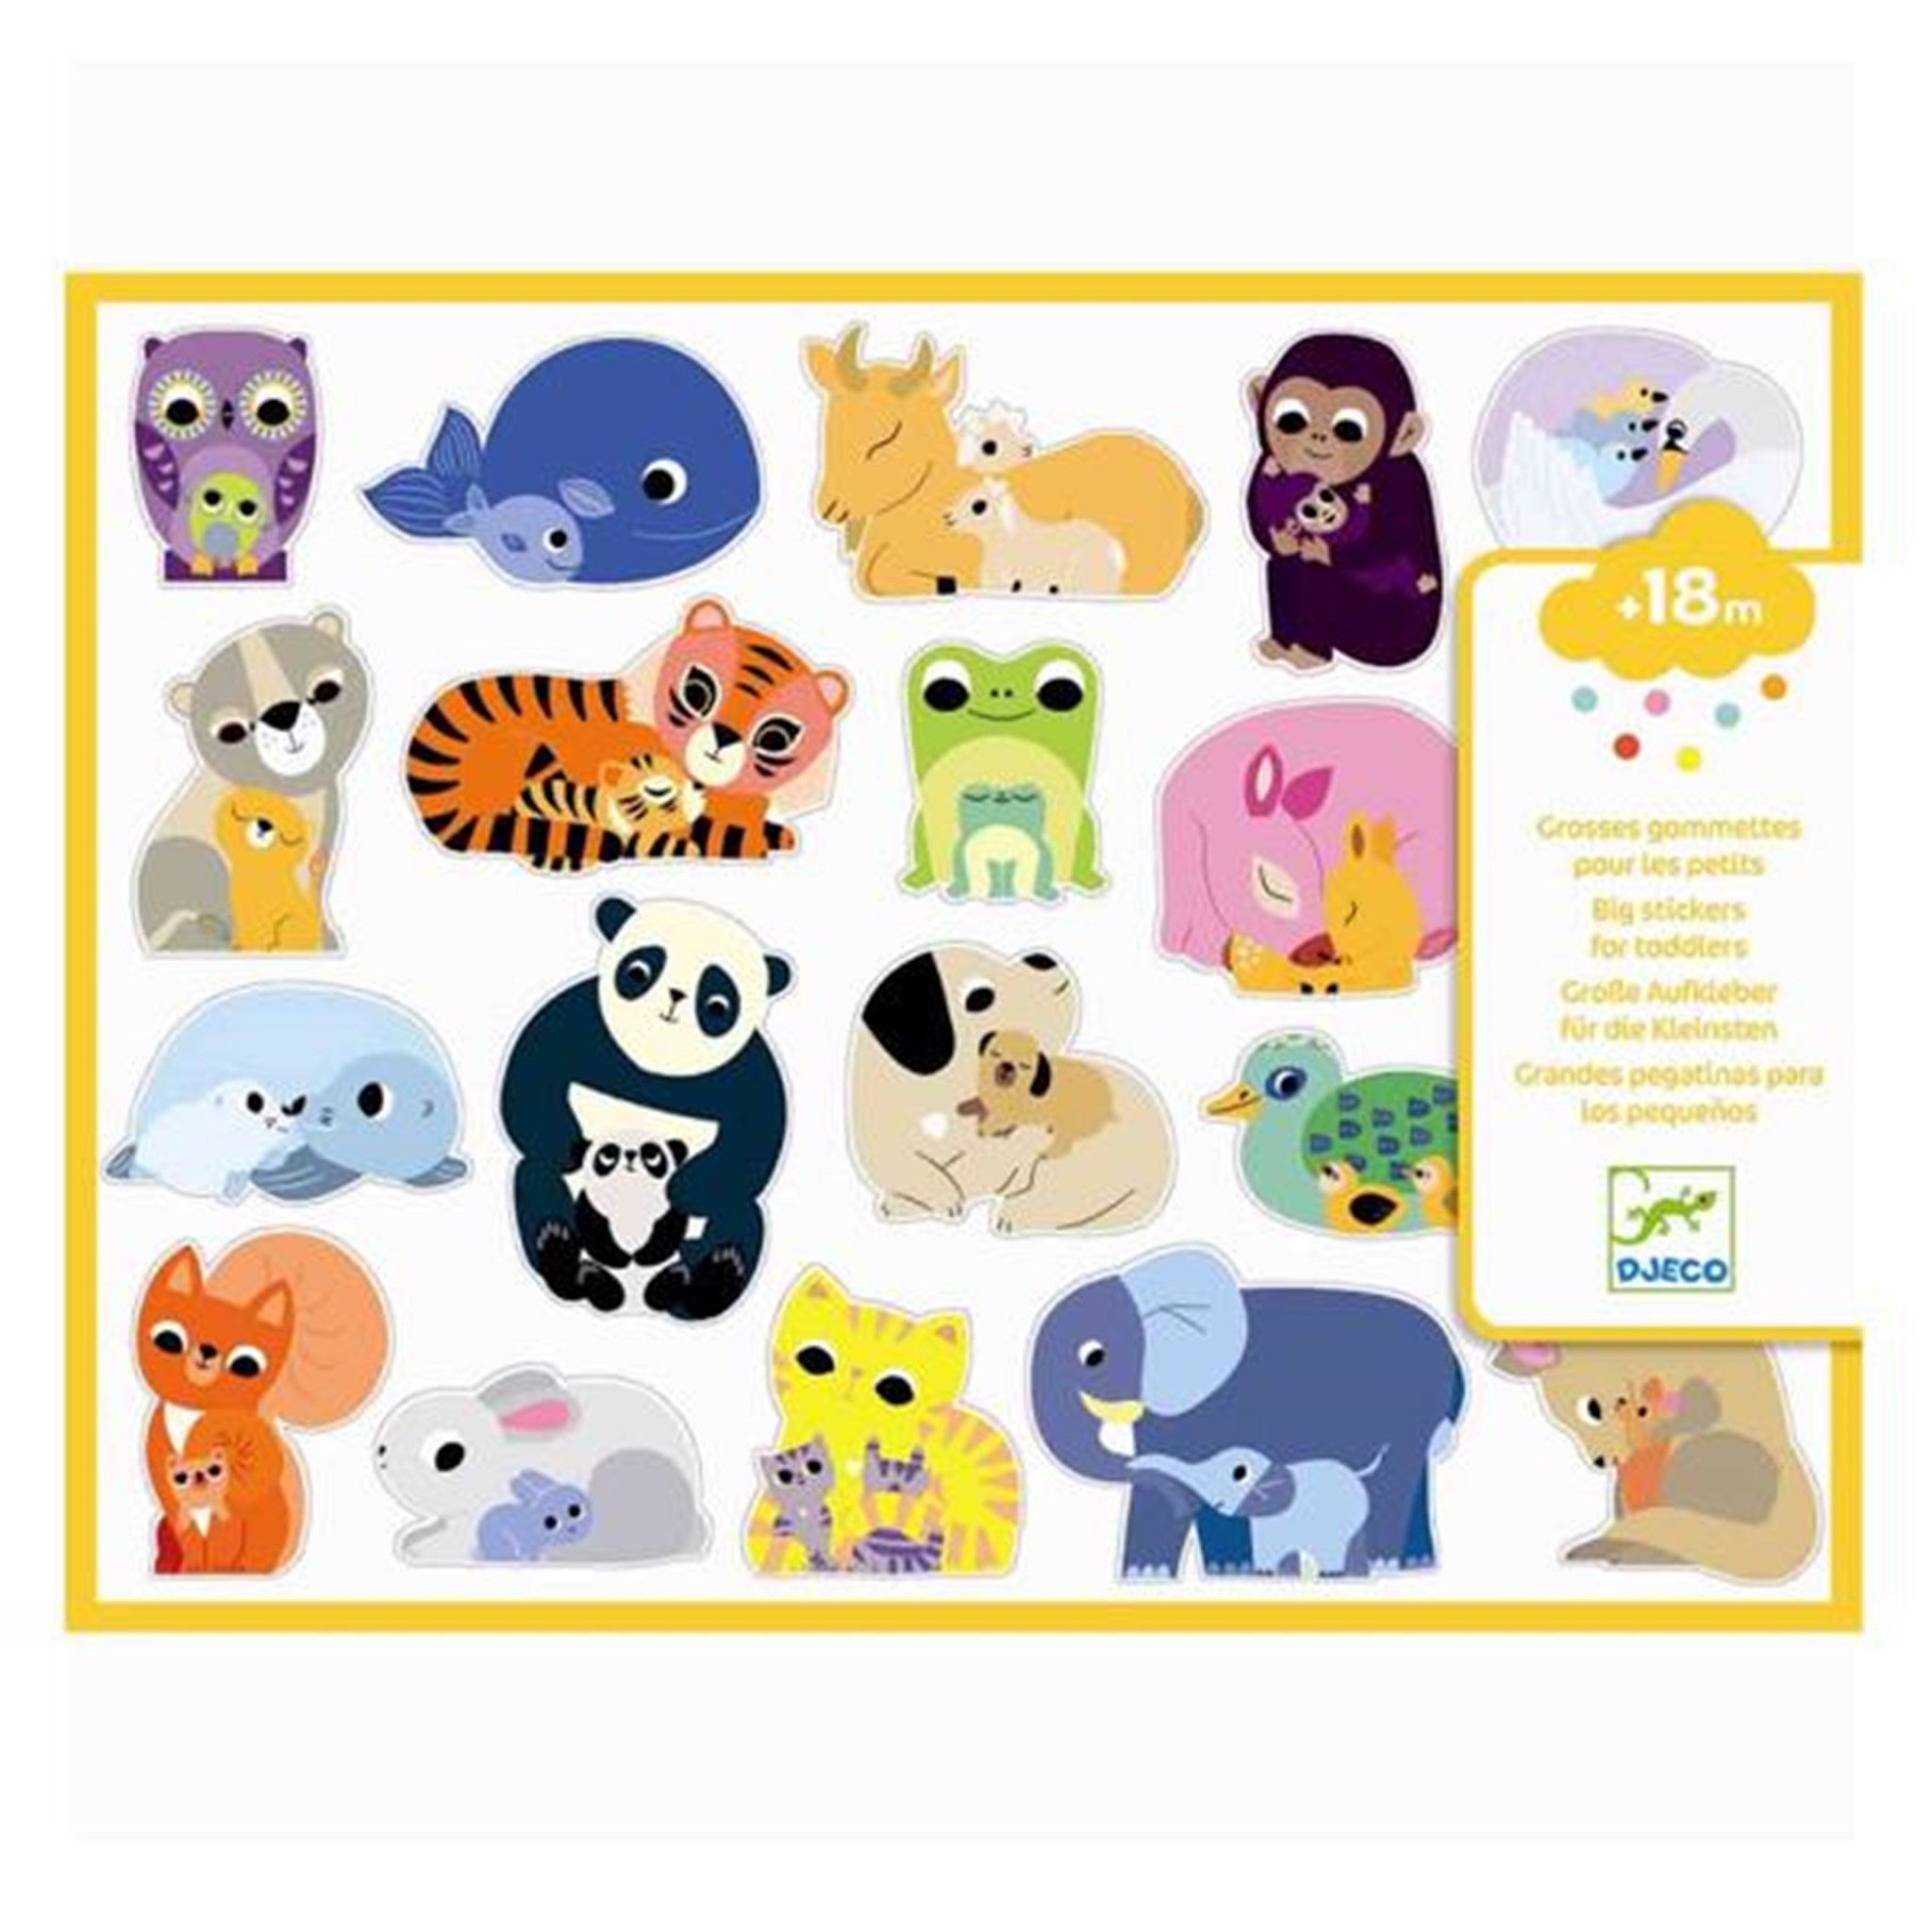 Djeco Stickers for Toddlers Mothers and Babies